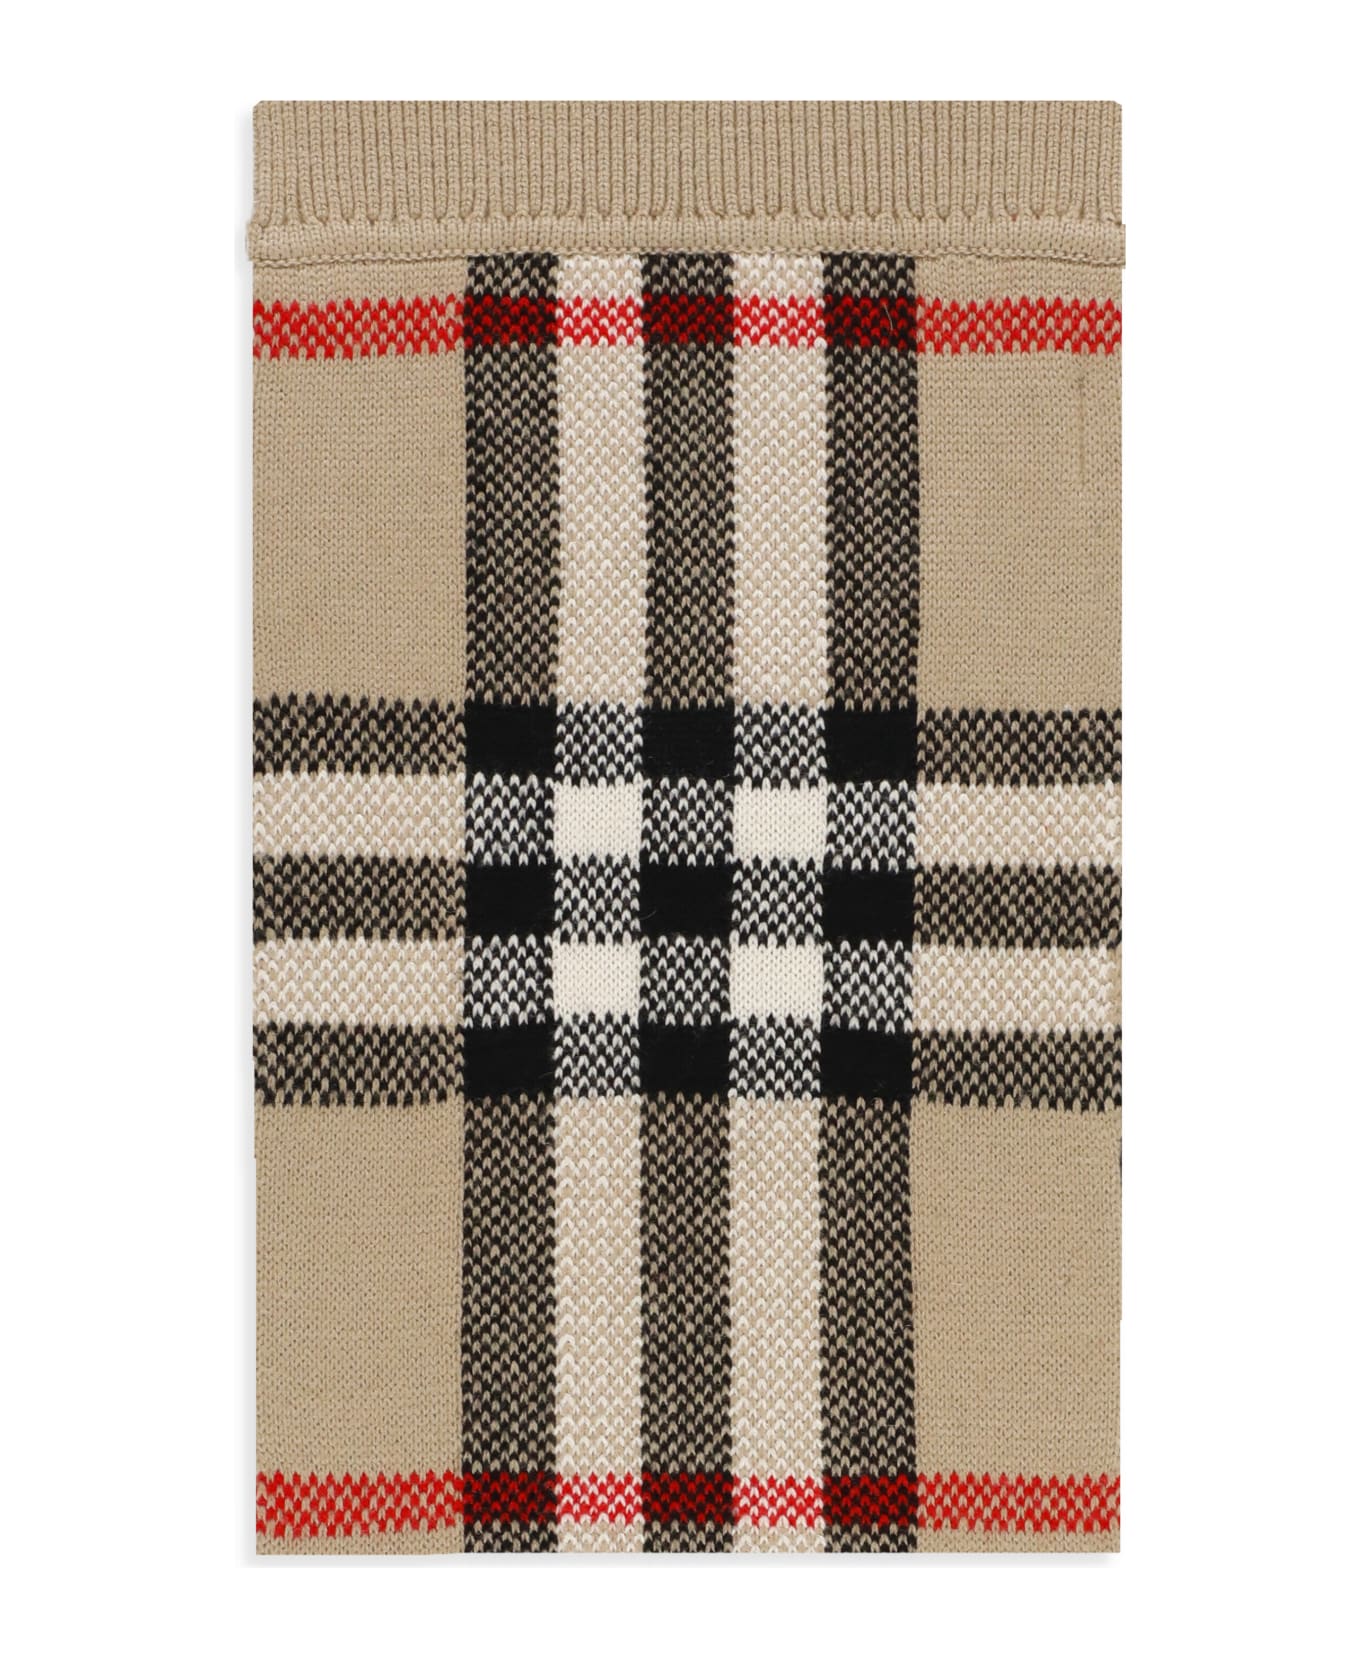 Burberry Dianne Check Scarf - ARCHIVE BEIGE IP CHK